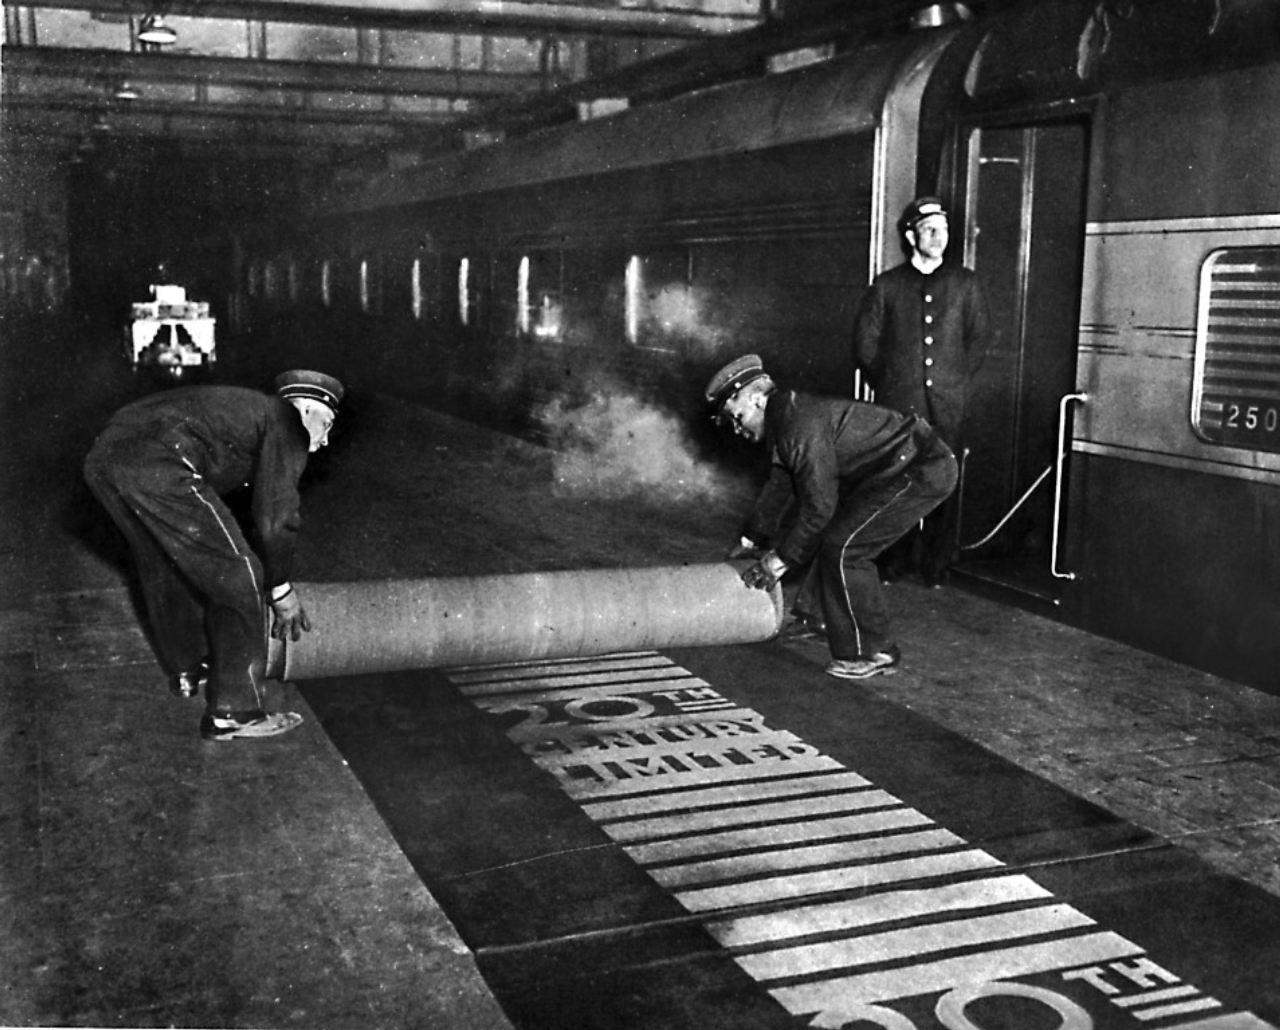 In an undated photo, workers rolling out the red carpet for passengers of the Twentieth Century Limited at Grand Central Terminal in New York. Amtrak will temporarily restore some intercity service to Grand Central Terminal to relieve pressure on the beleaguered Pennsylvania Station. (The New York Times)